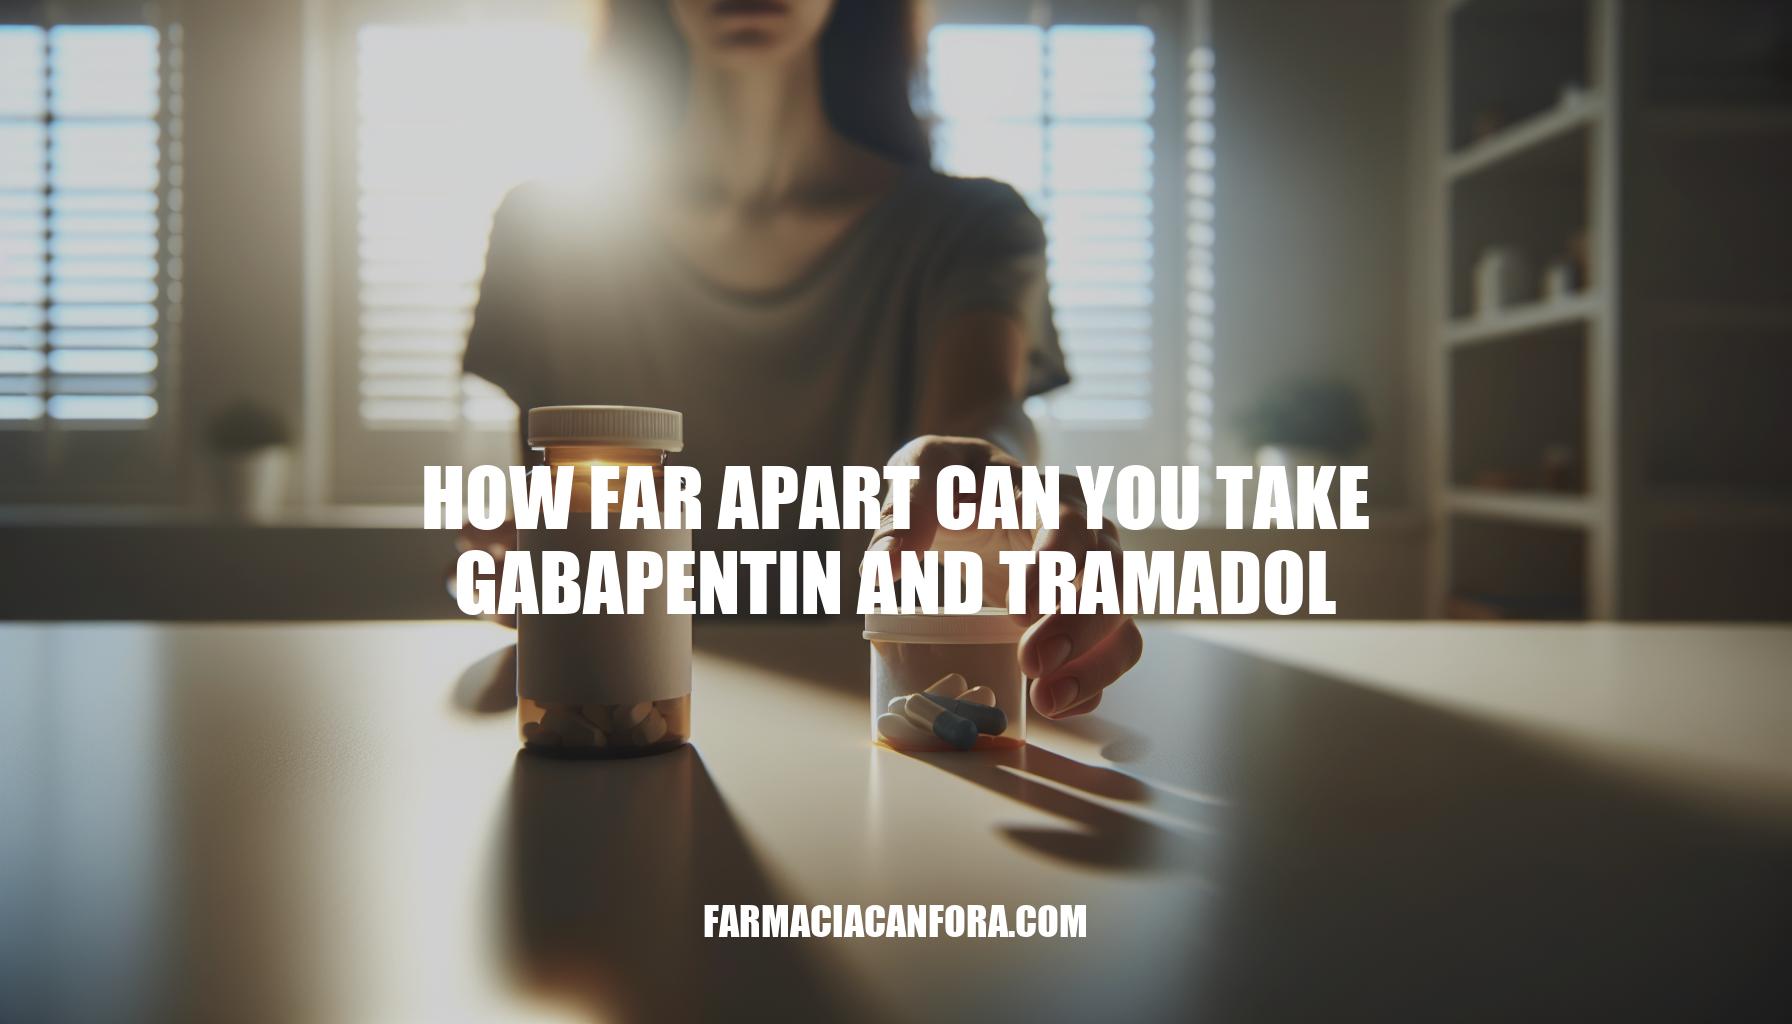 How Far Apart Can You Take Gabapentin and Tramadol